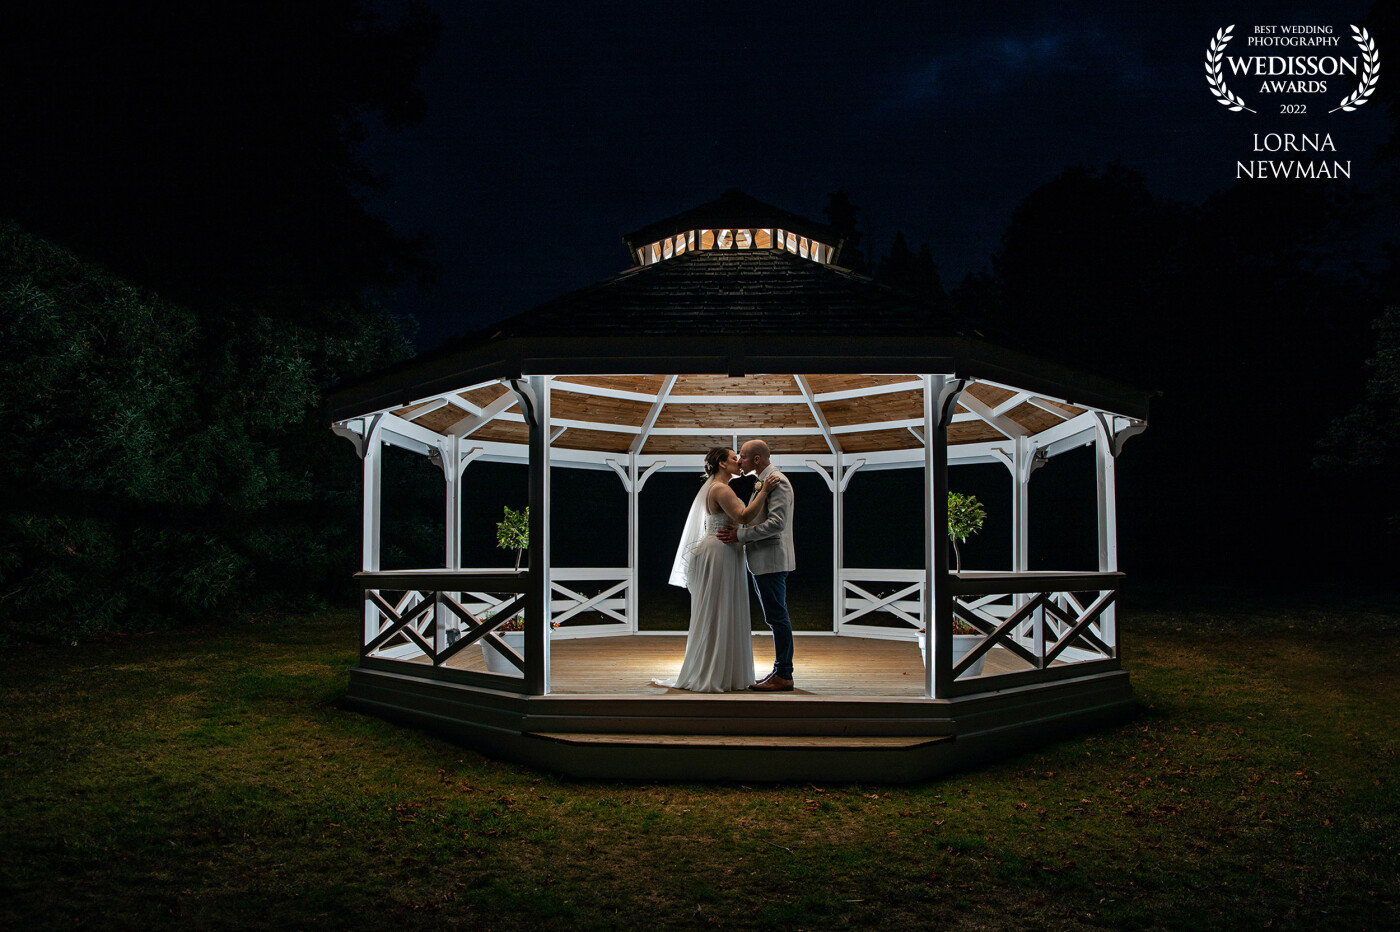 A shot from Nathalie & Stephen’s beautiful wedding at Holmewood Hall in Cambridgeshire. We took advantage of the darker evenings to create this moment between them.